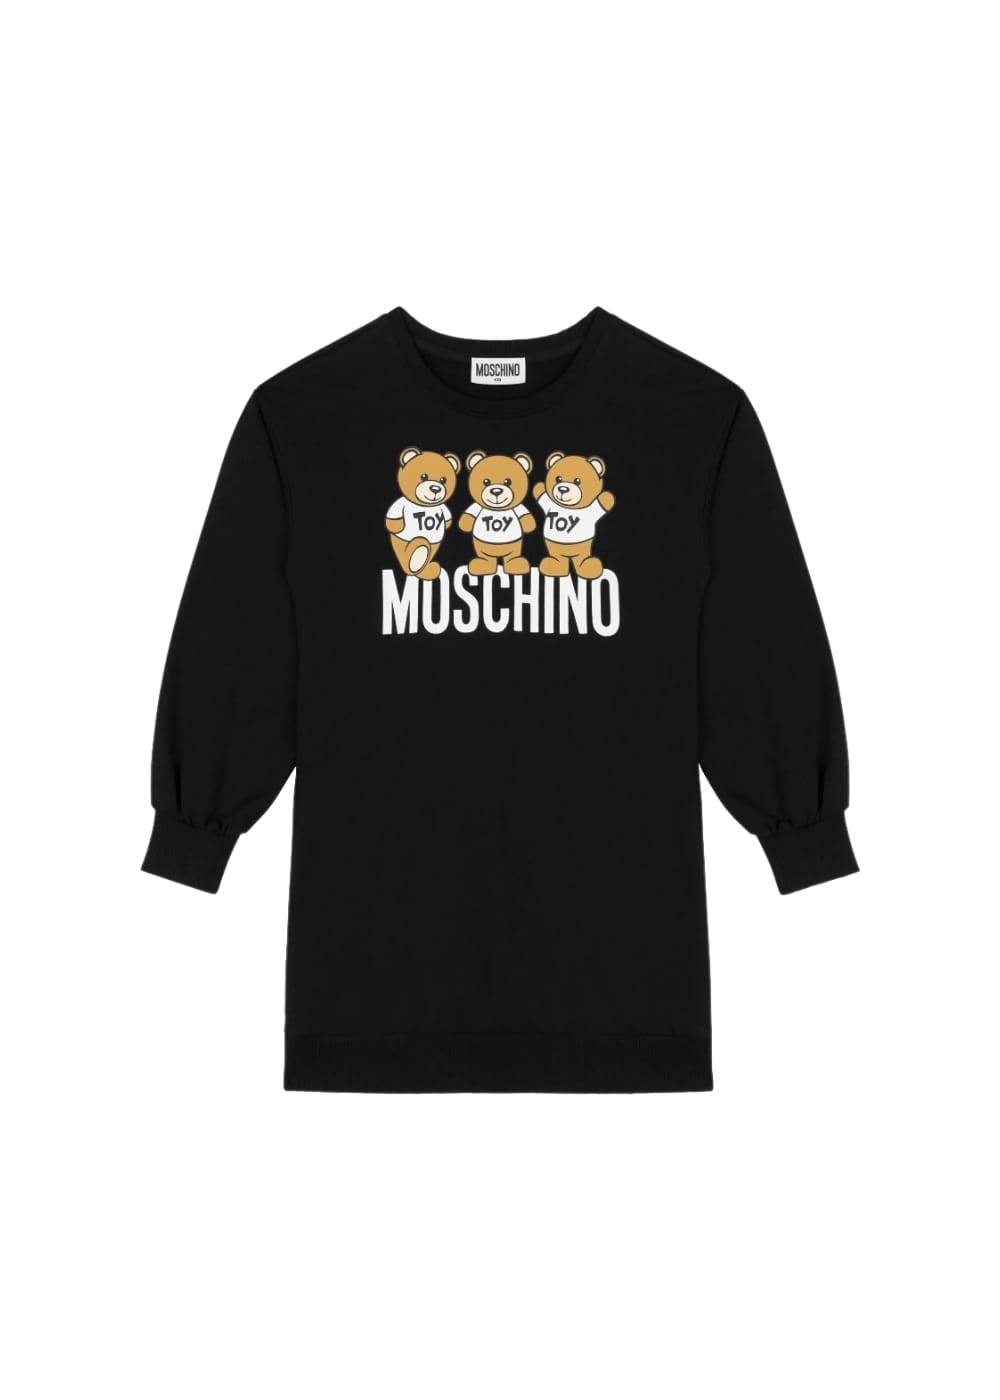 Featured image for “Moschino Abito in Felpa”